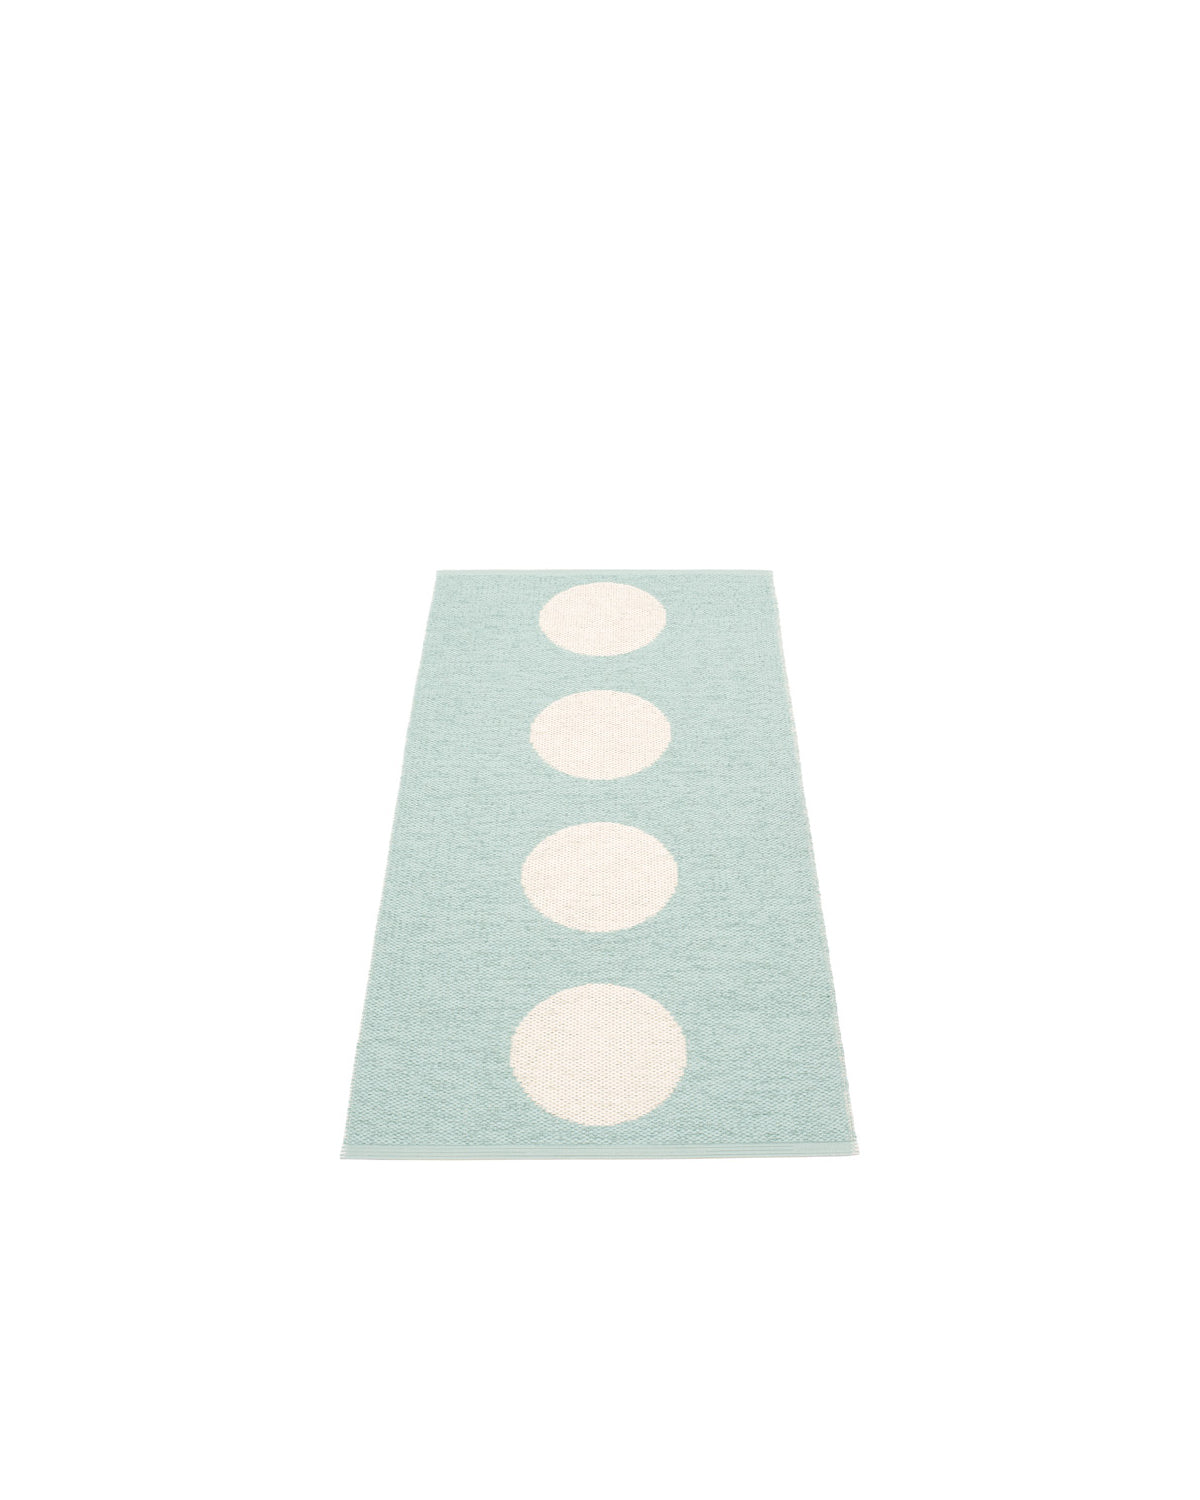 Pappelina Rug VERA Pale Turquoise  image 1